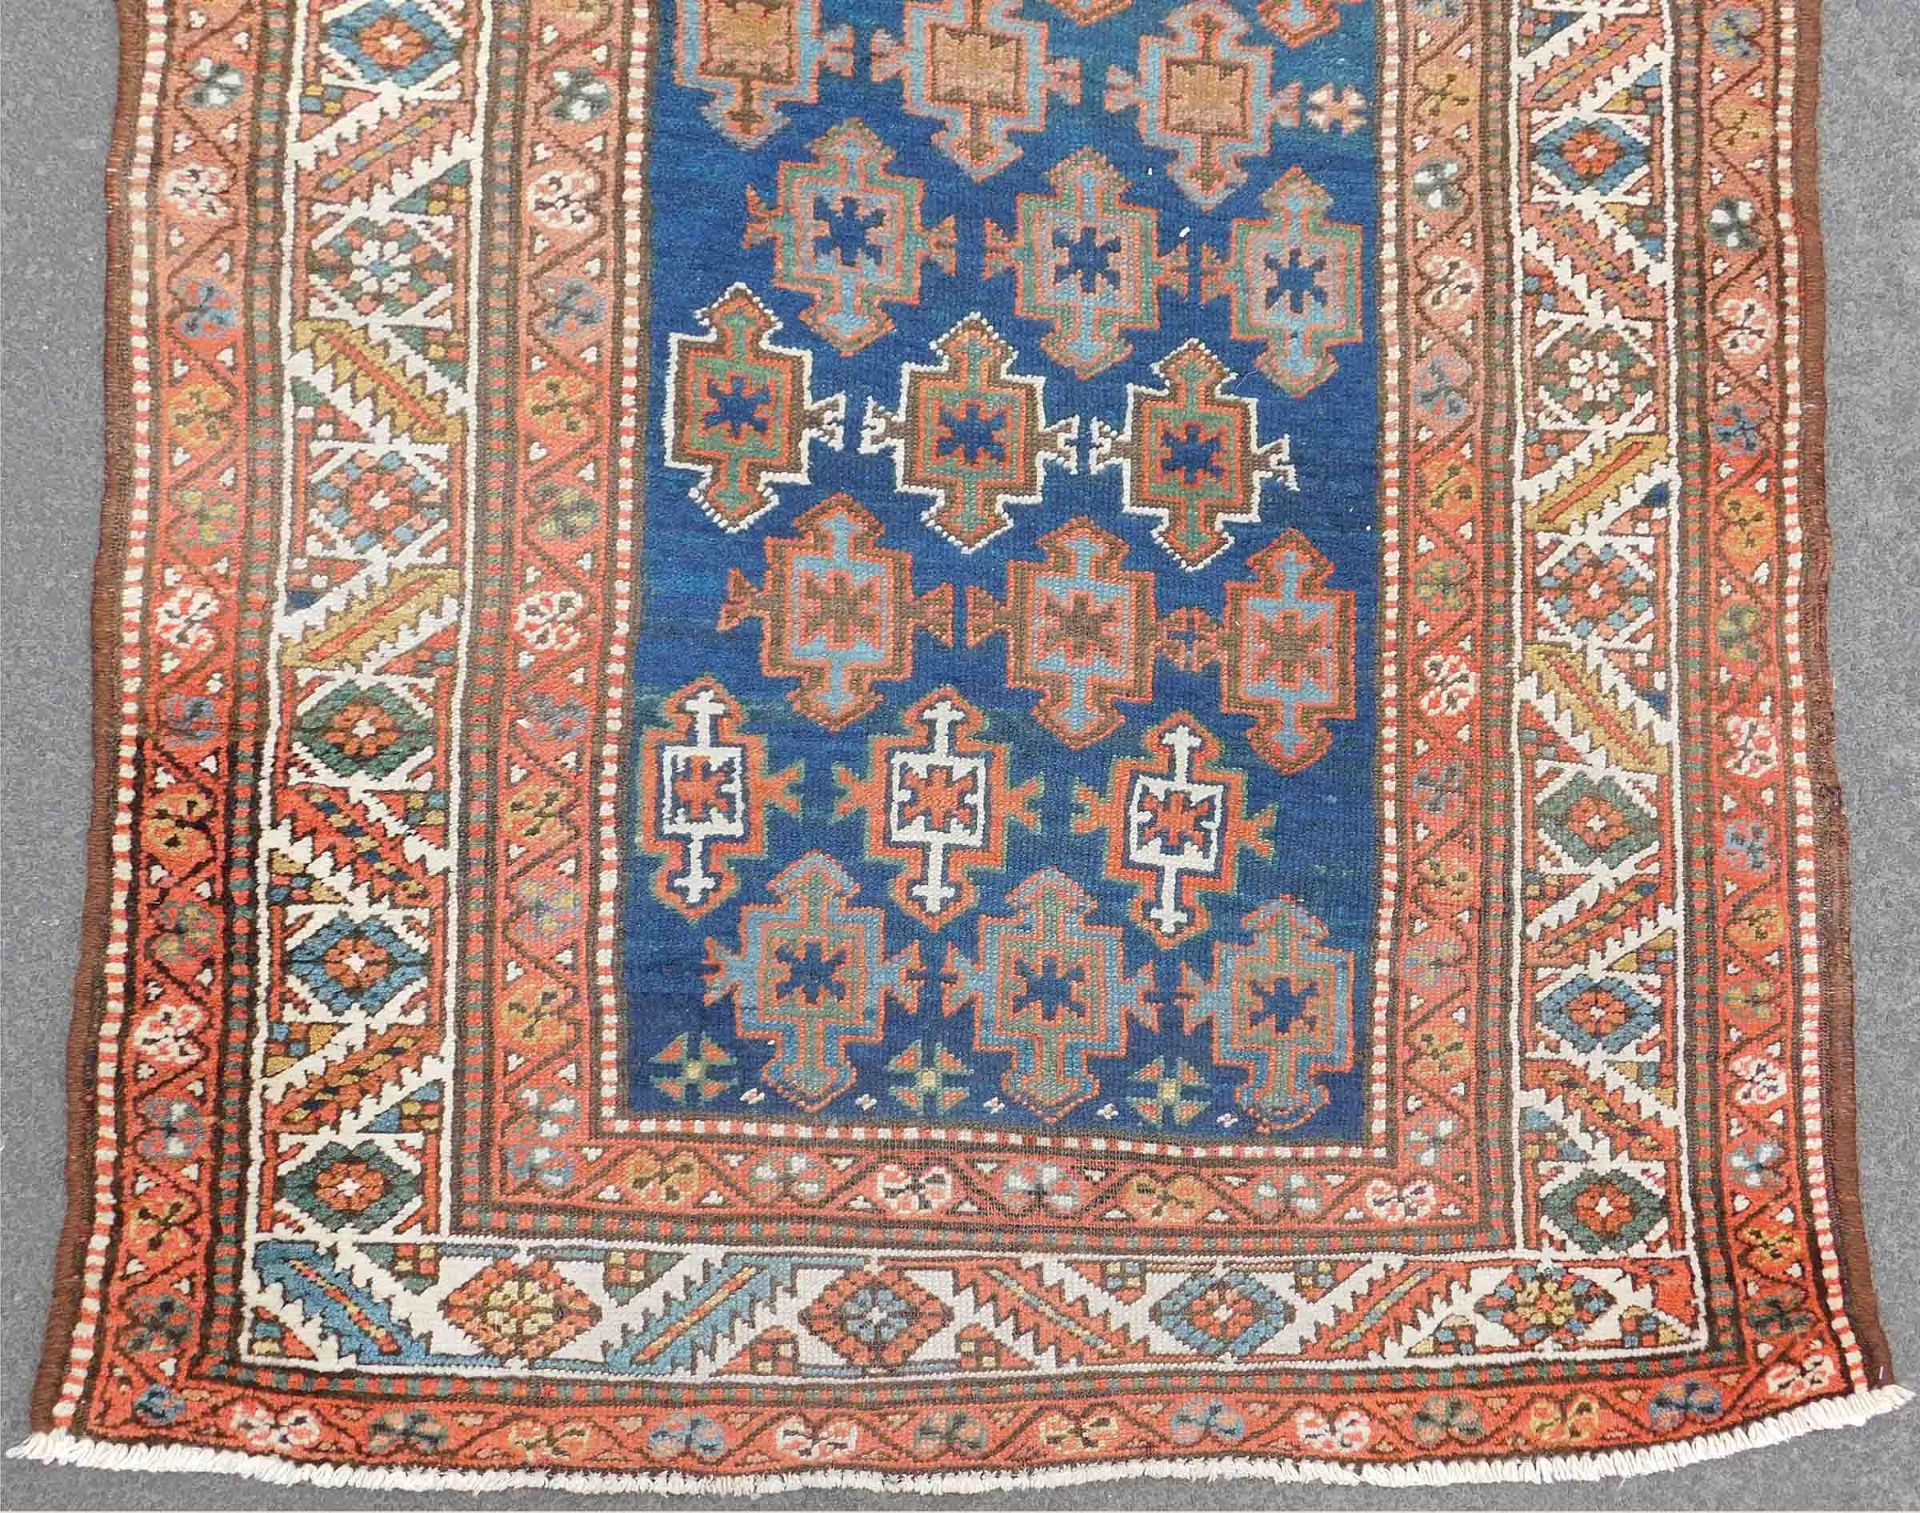 Heriz Persian rug. Runner. Iran. Antique, around 1912-1913.Knotted by hand. Wool on wool. Probably - Image 2 of 8